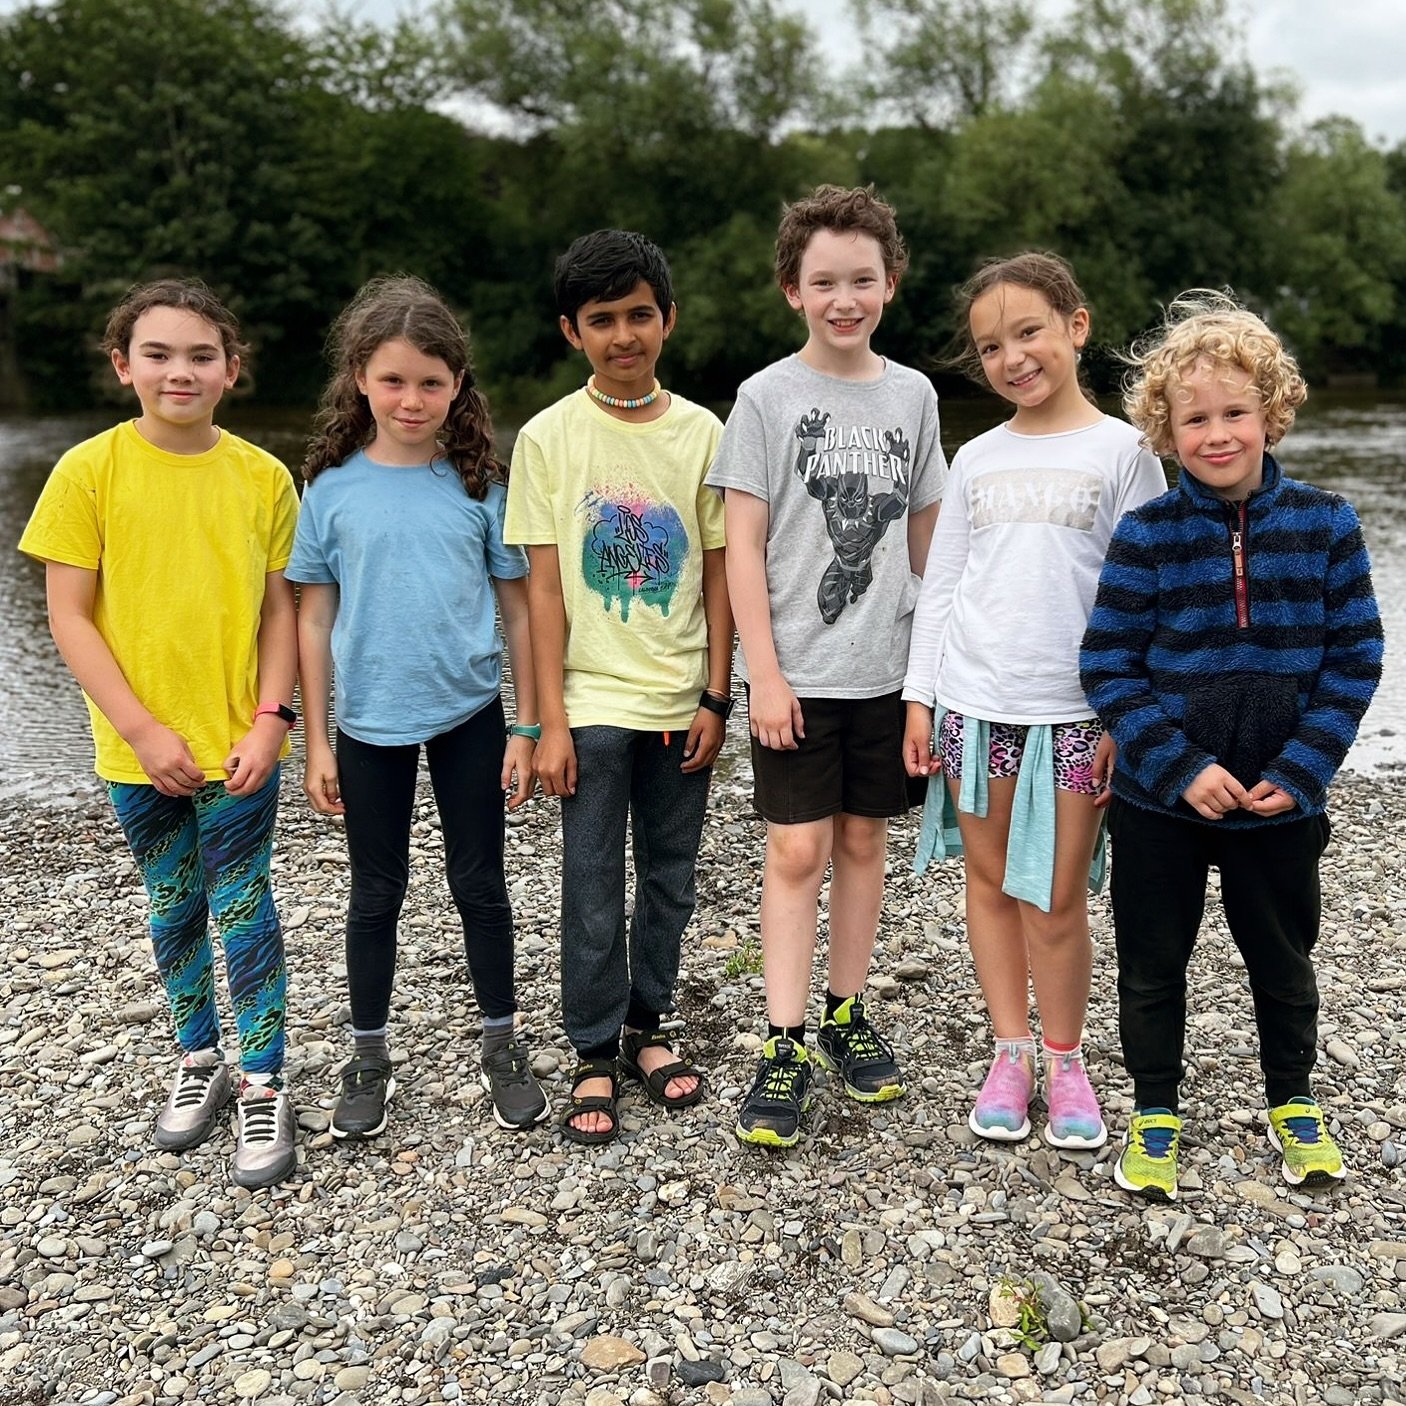 How many skips can you get?!

For some of these guys it was their first time skipping stones. Not all activities at camp need to be high adrenaline like swinging from high ropes or building rafts - there&rsquo;s time for skipping stones, telling stor